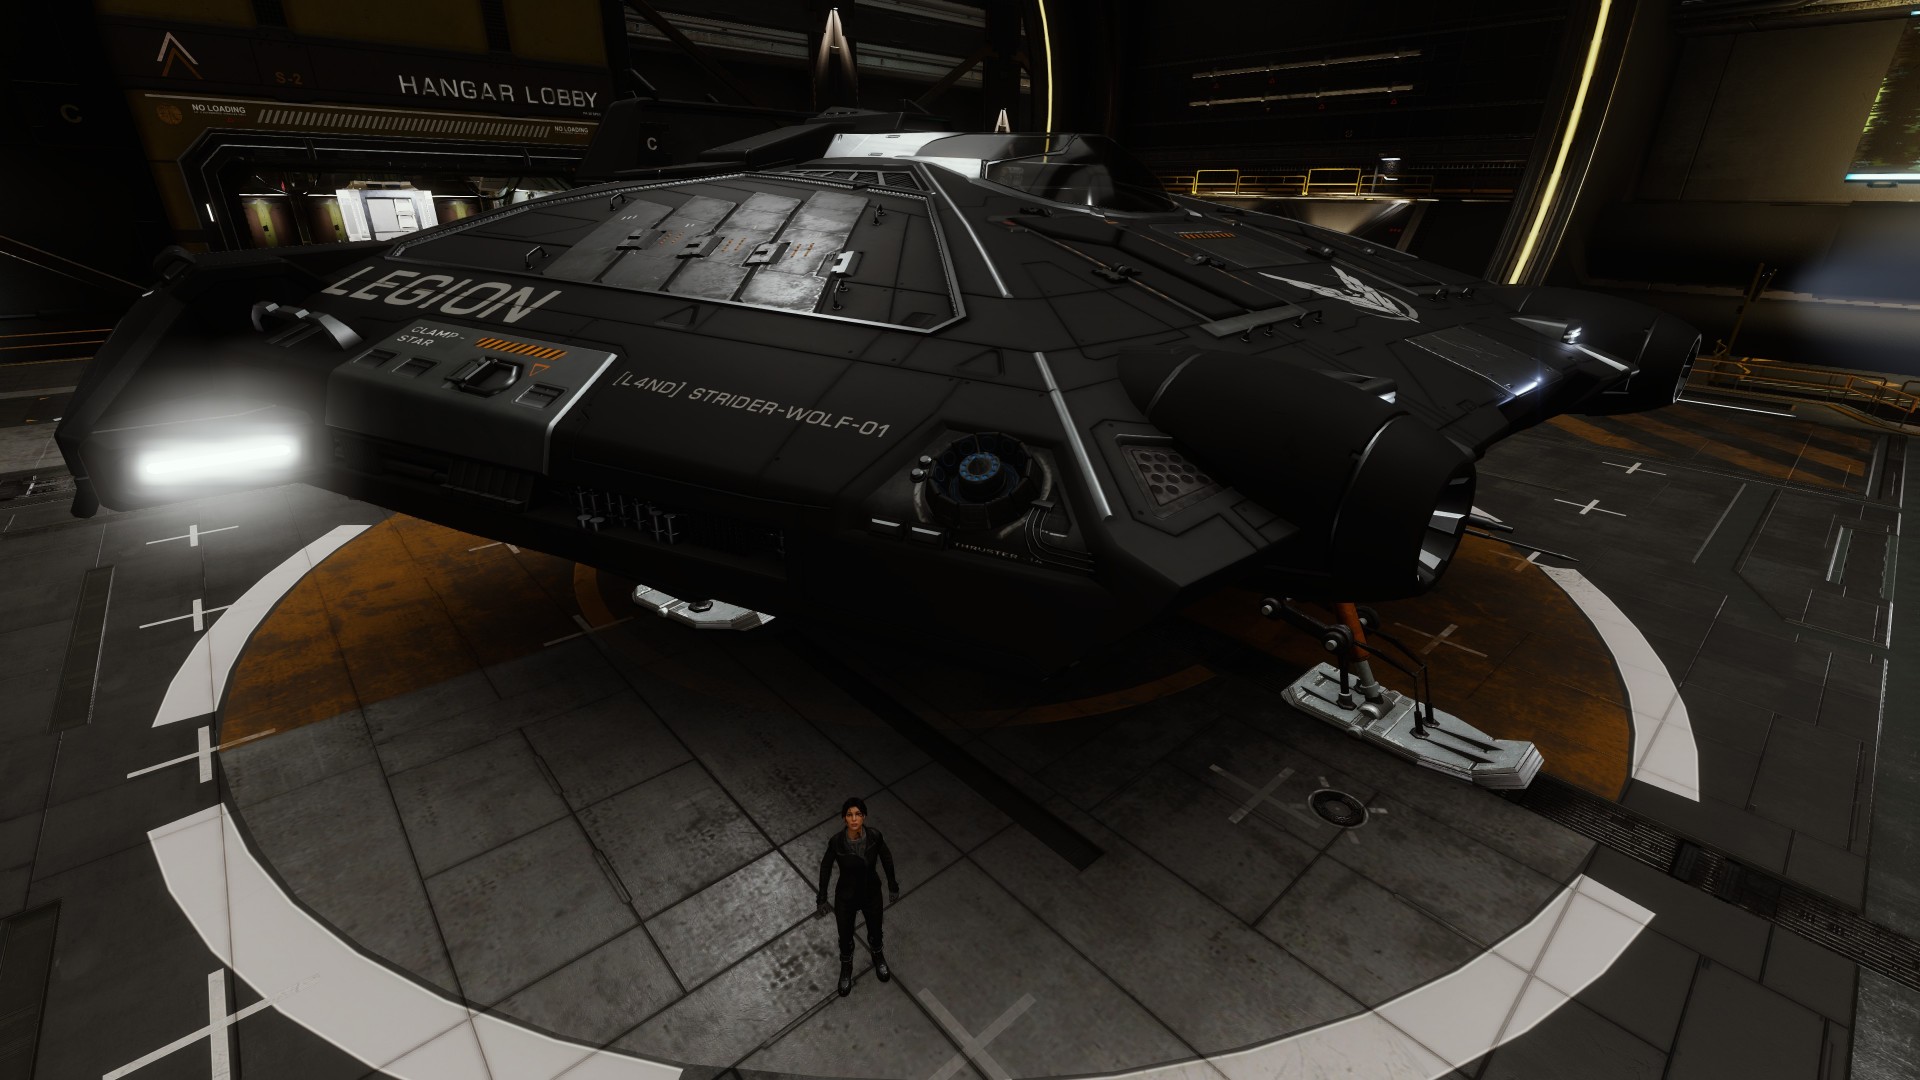 Legion member standing in front of their ship